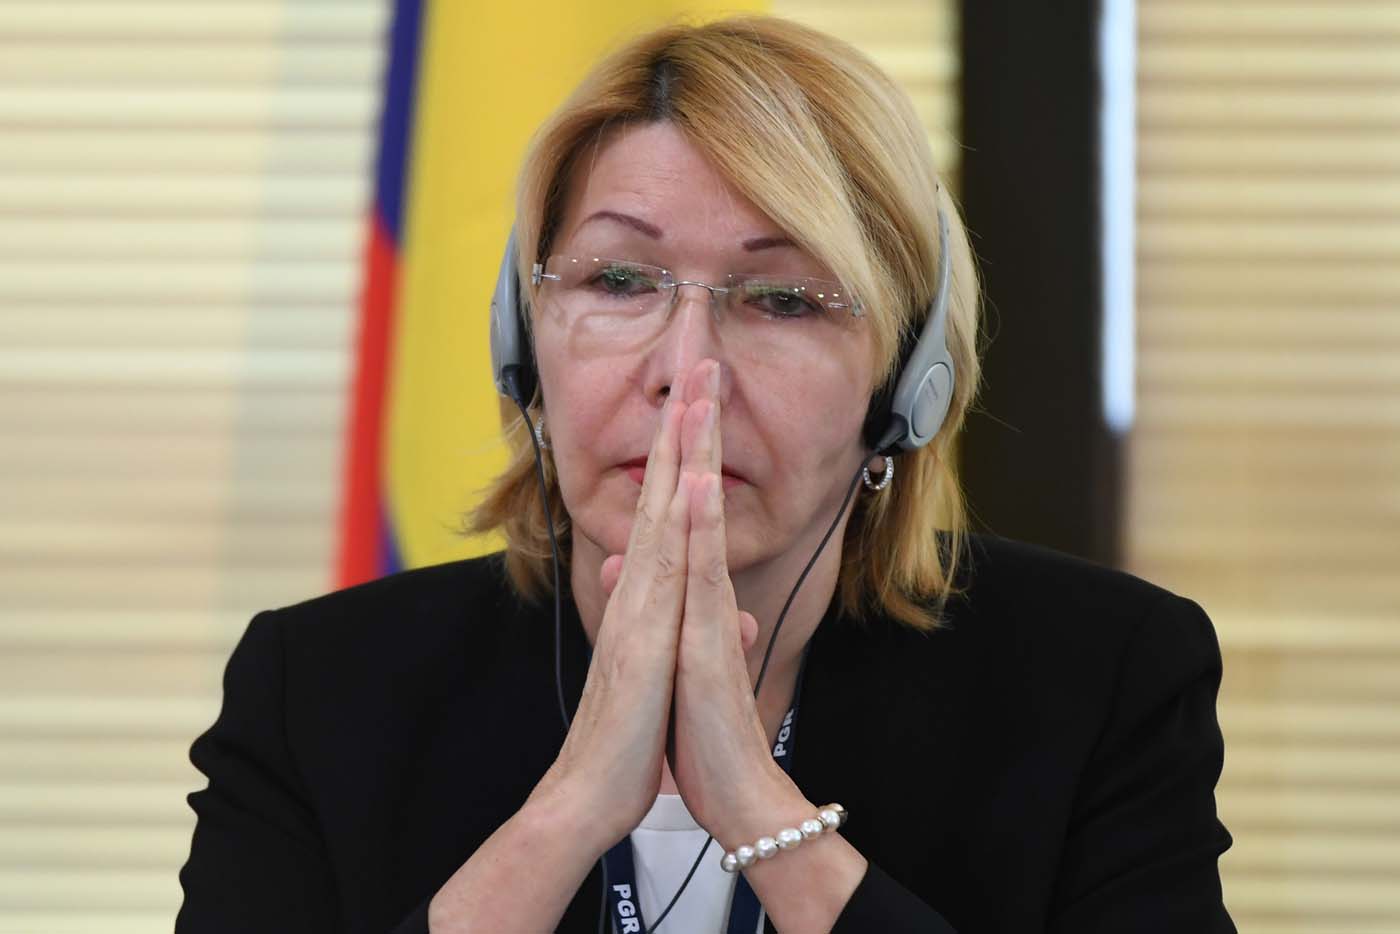 Venezuela's fugitive former top prosecutor Luisa Ortega, one of President Nicolas Maduro's most vocal critics, invited by Brazil's prosecutor general Rodrigo Janot, attends a conference with representatives from the Latin American regional trading alliance Mercosur, in Brasilia, on August 23, 2017. Ortega promised to use the international forum in Brazil to intensify corruption allegations against Maduro, who called for her arrest. Days after a dramatic escape from Venezuela, Ortega arrived in Brasilia promising to dish dirt on Maduro, who in turn asked Interpol to put out a "red notice" warrant for his critic. / AFP PHOTO / EVARISTO SA